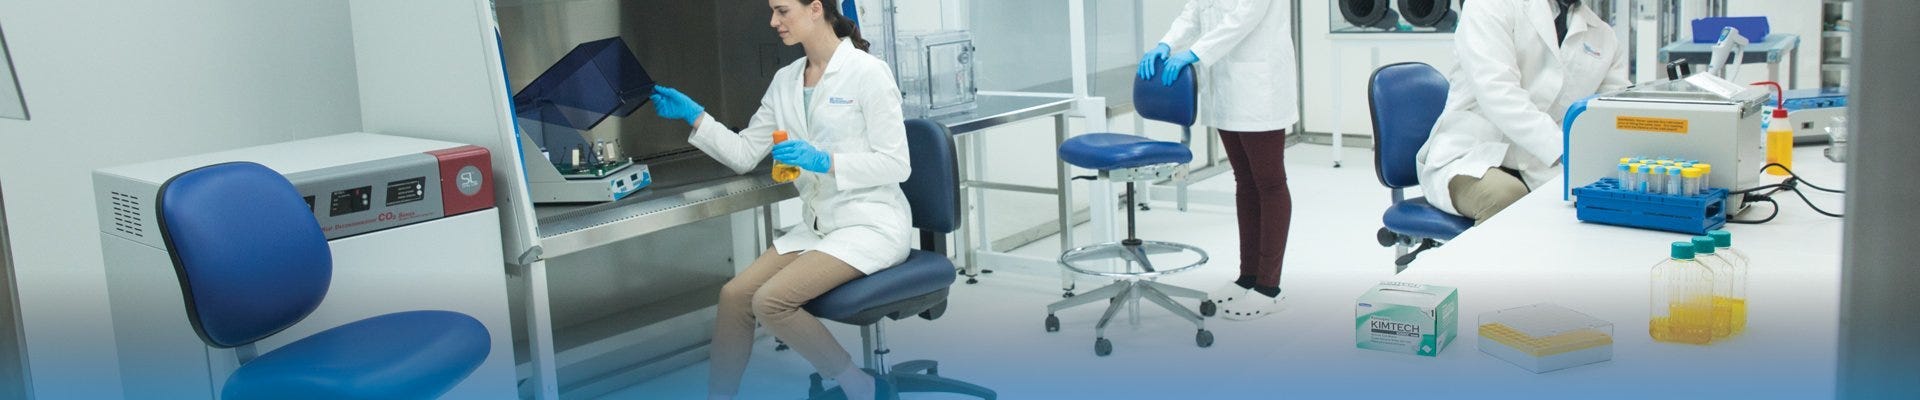 These durable, ergonomic lab chairs from BioFit and Dauphin are designed specifically for cleanroom and laboratory seating